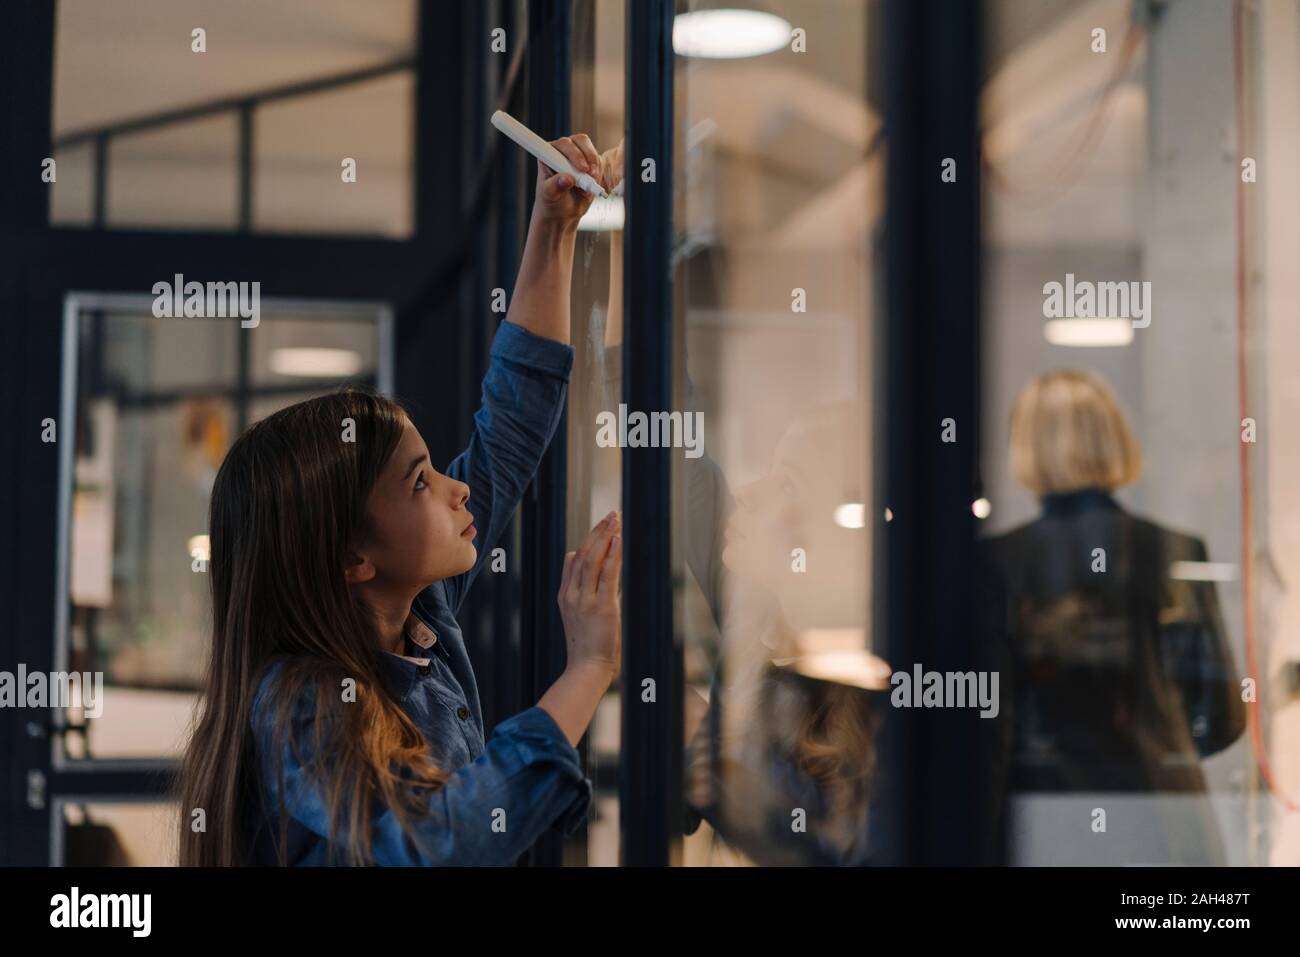 Girl drawing on glass pane in office Stock Photo